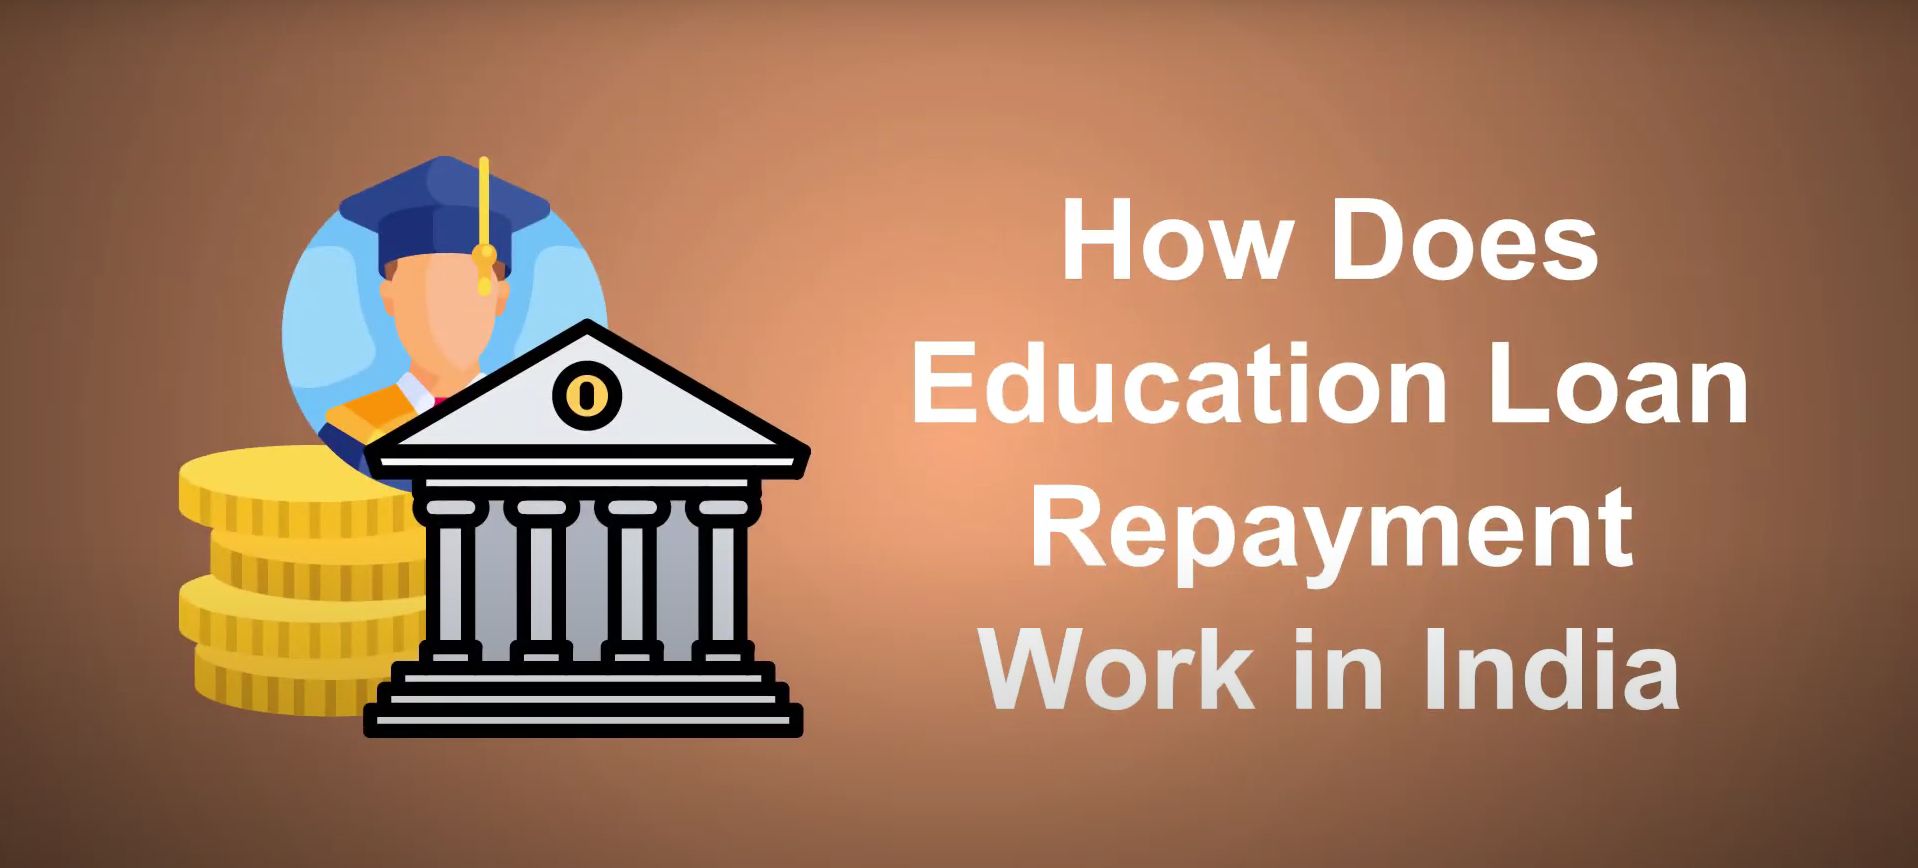 How Does Education Loan Repayment Work in India